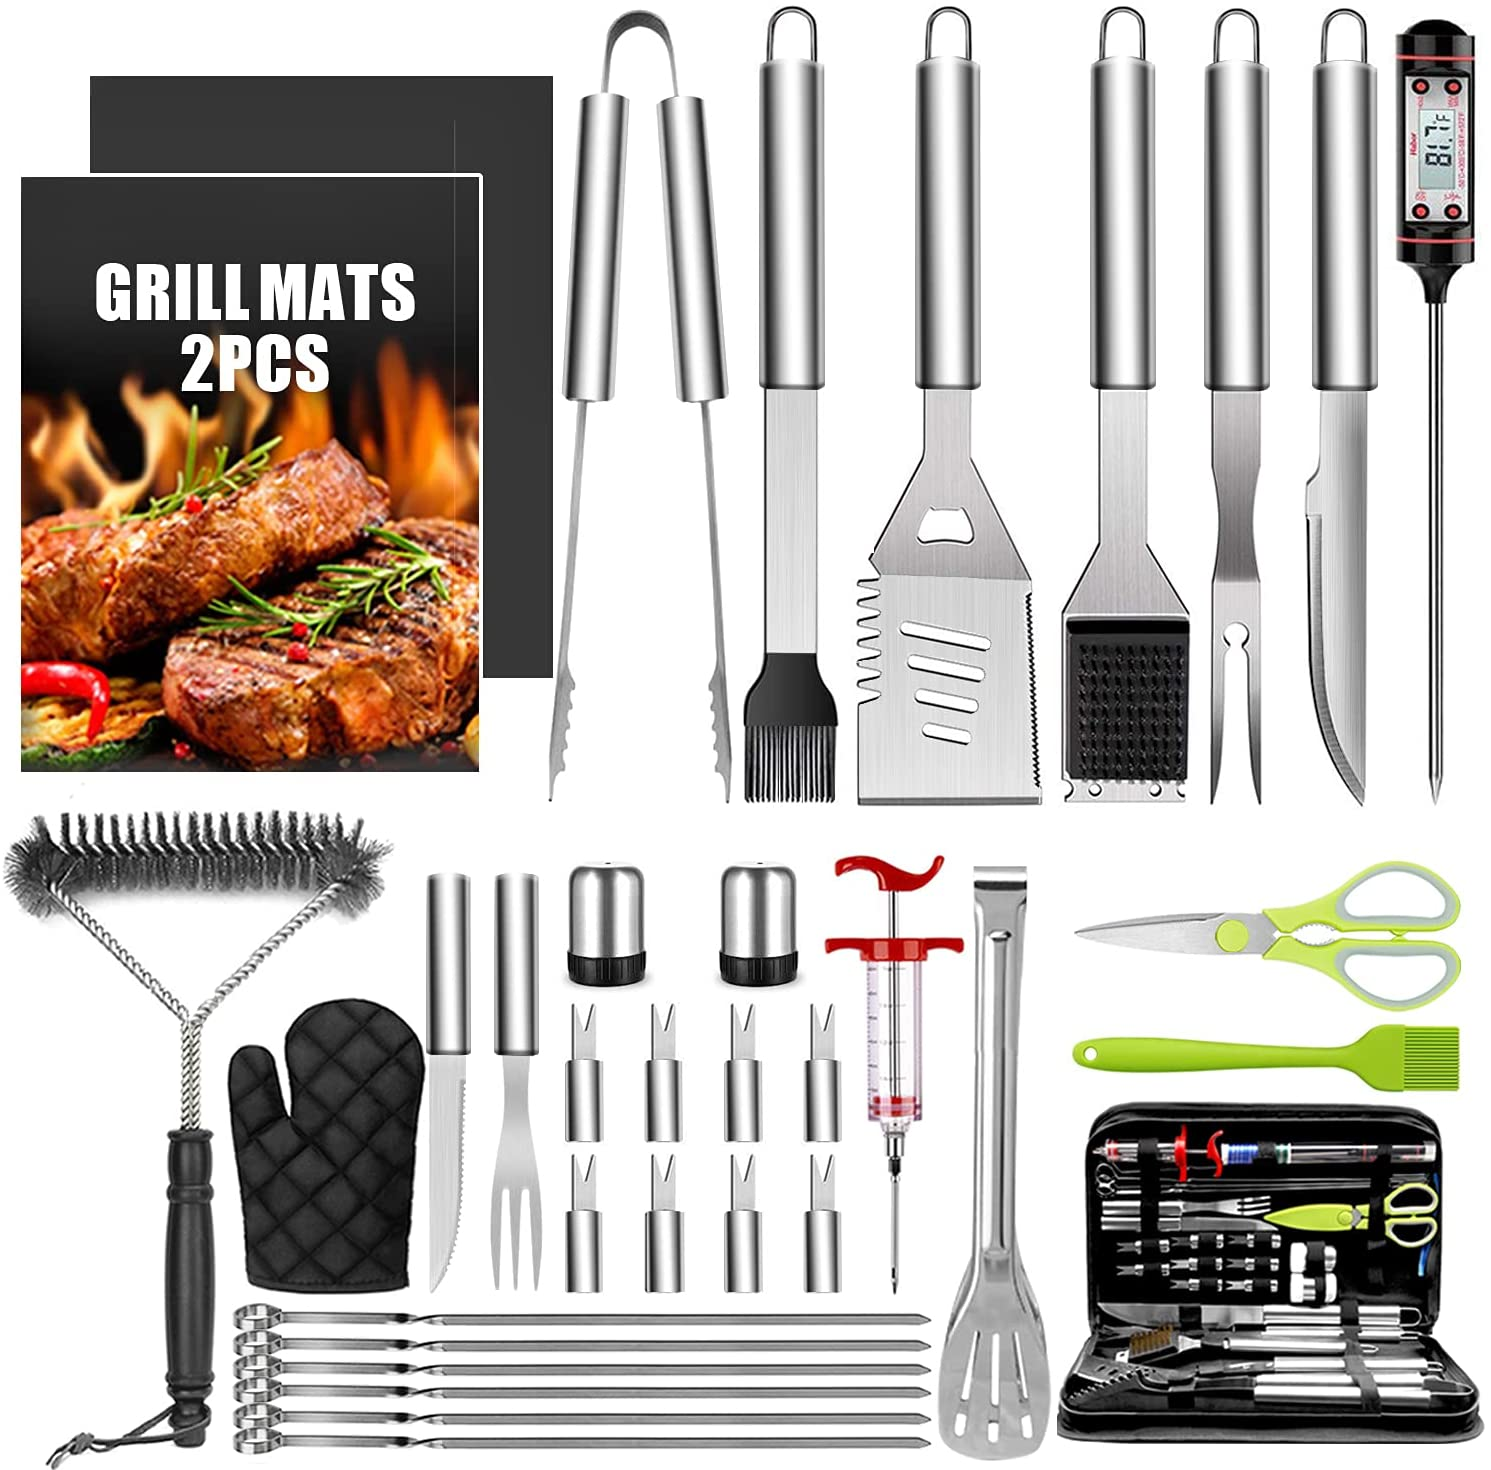 BBQ Grill Tool Set, Stainless Steel Barbecue Grilling Accessories with 7  Utensils and Carrying Case, Includes Spatula, Tongs, Knife by Home-Complete